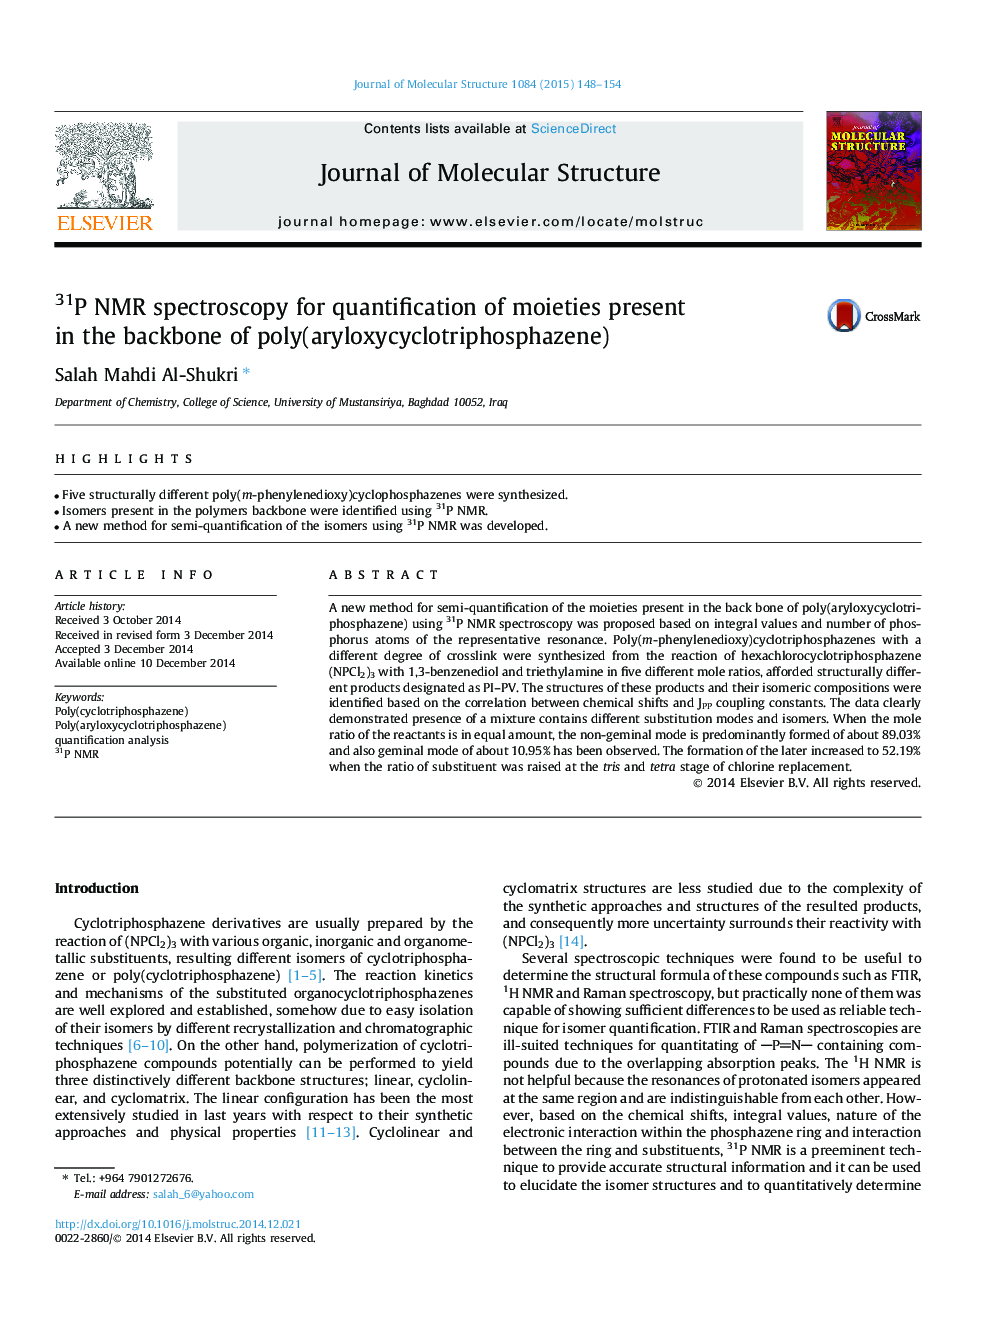 31P NMR spectroscopy for quantification of moieties present in the backbone of poly(aryloxycyclotriphosphazene)